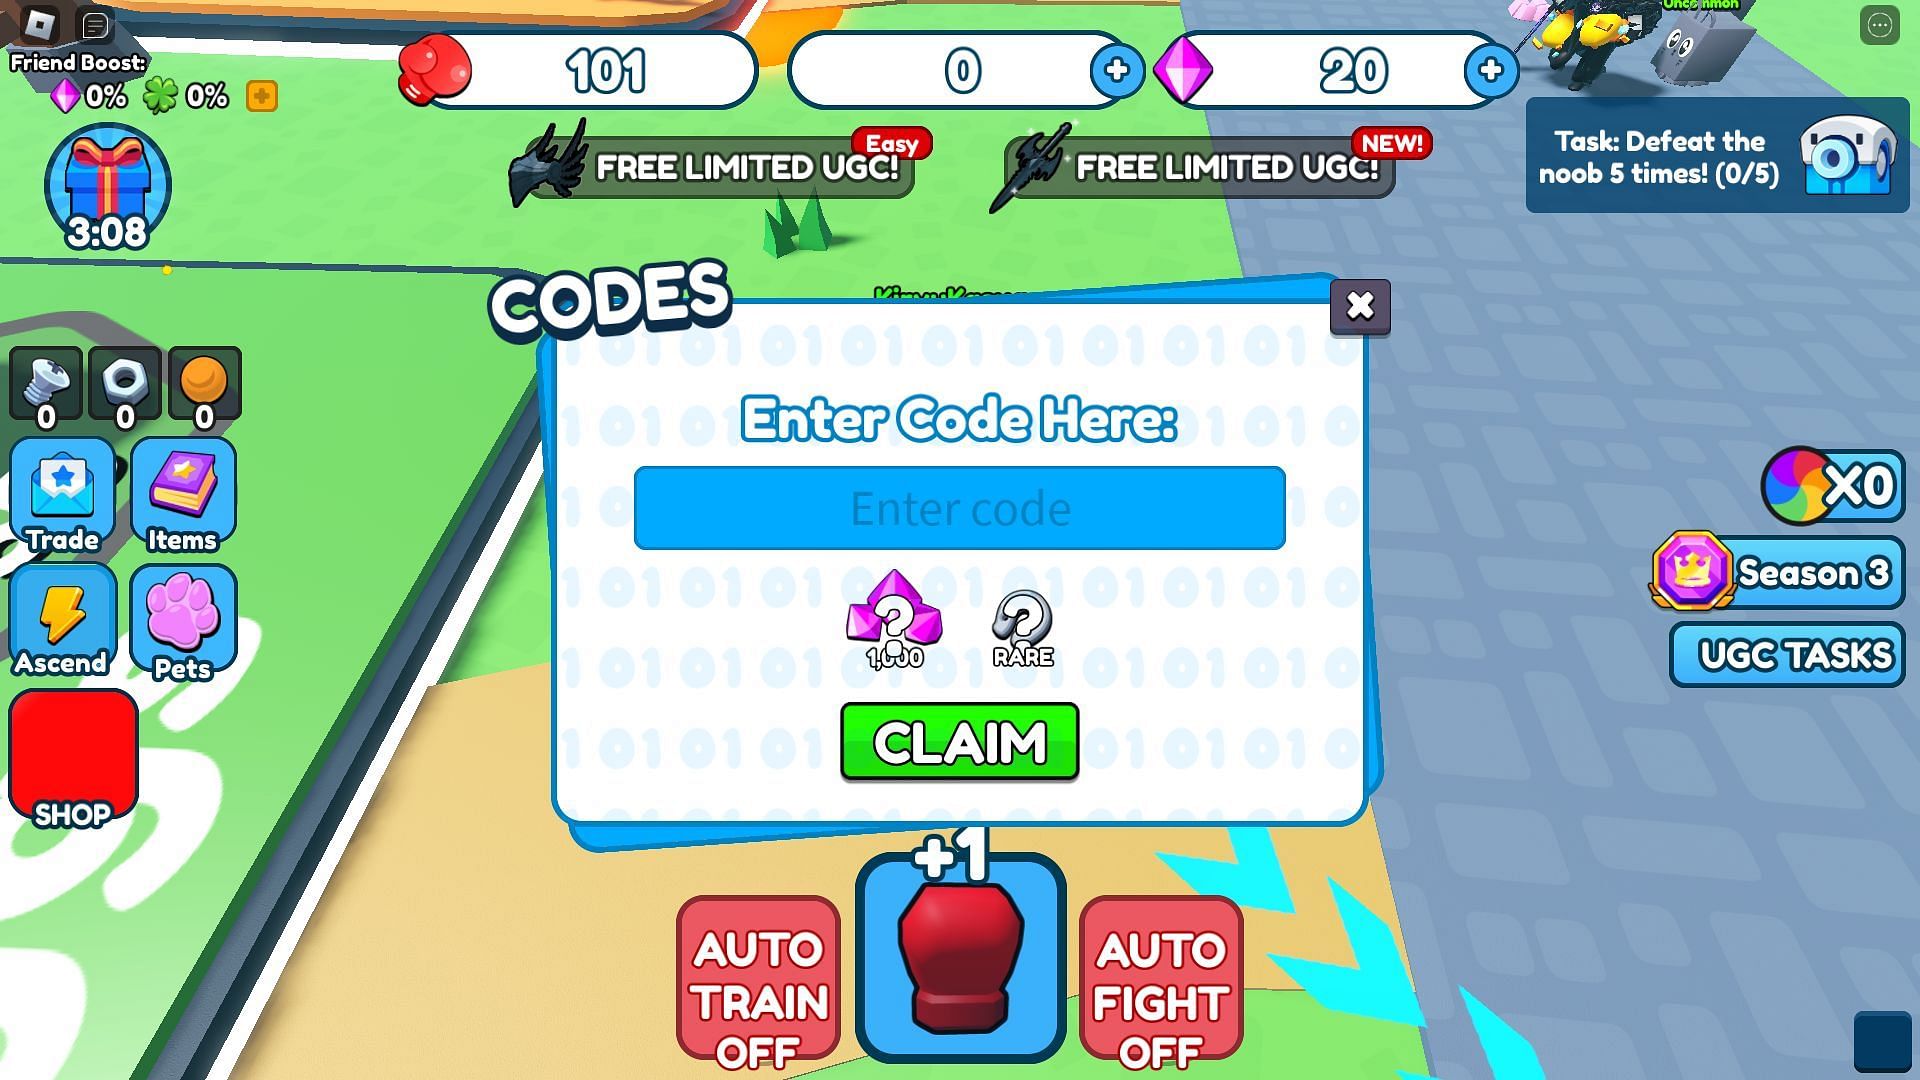 Active codes for Punch Simulator (Image via Roblox)